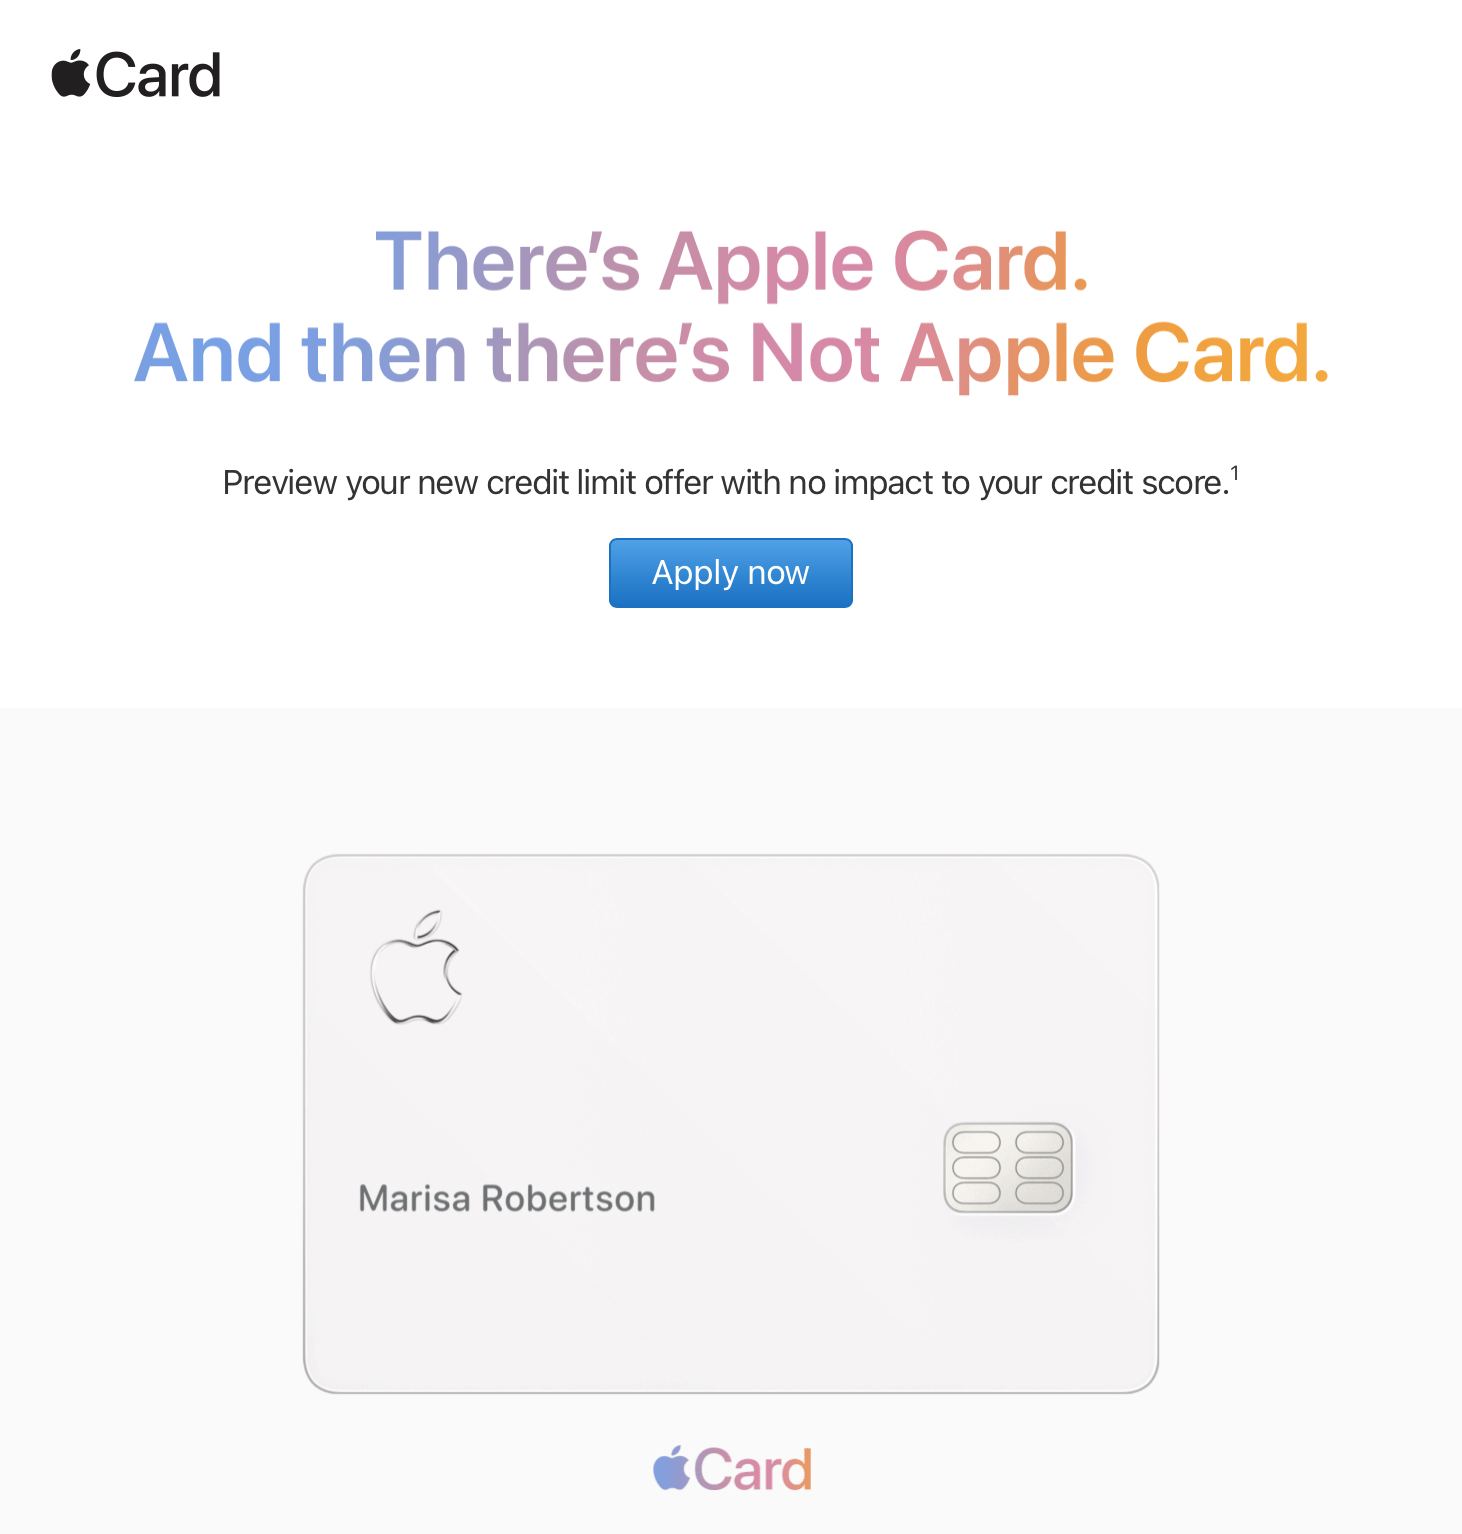 Apple Card credit limit preview